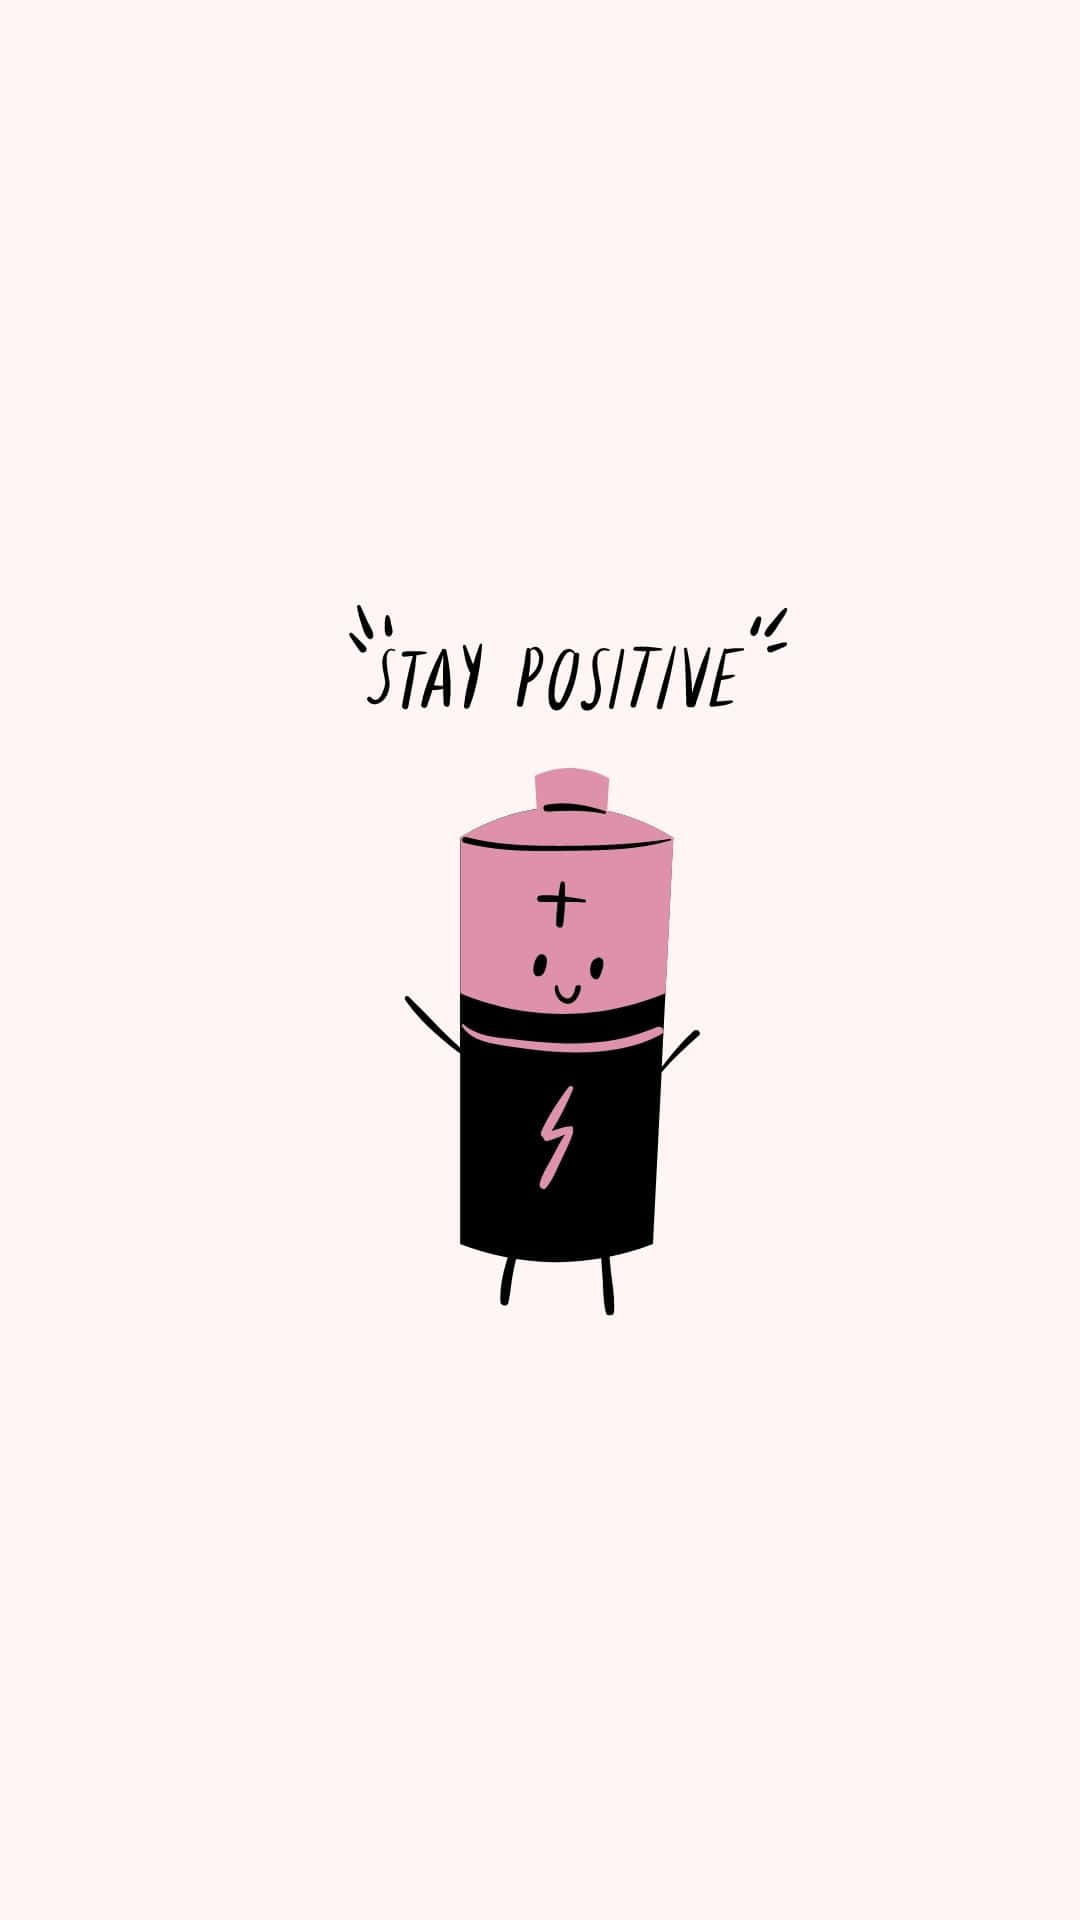 A Cartoon Battery With The Words Stay Positive